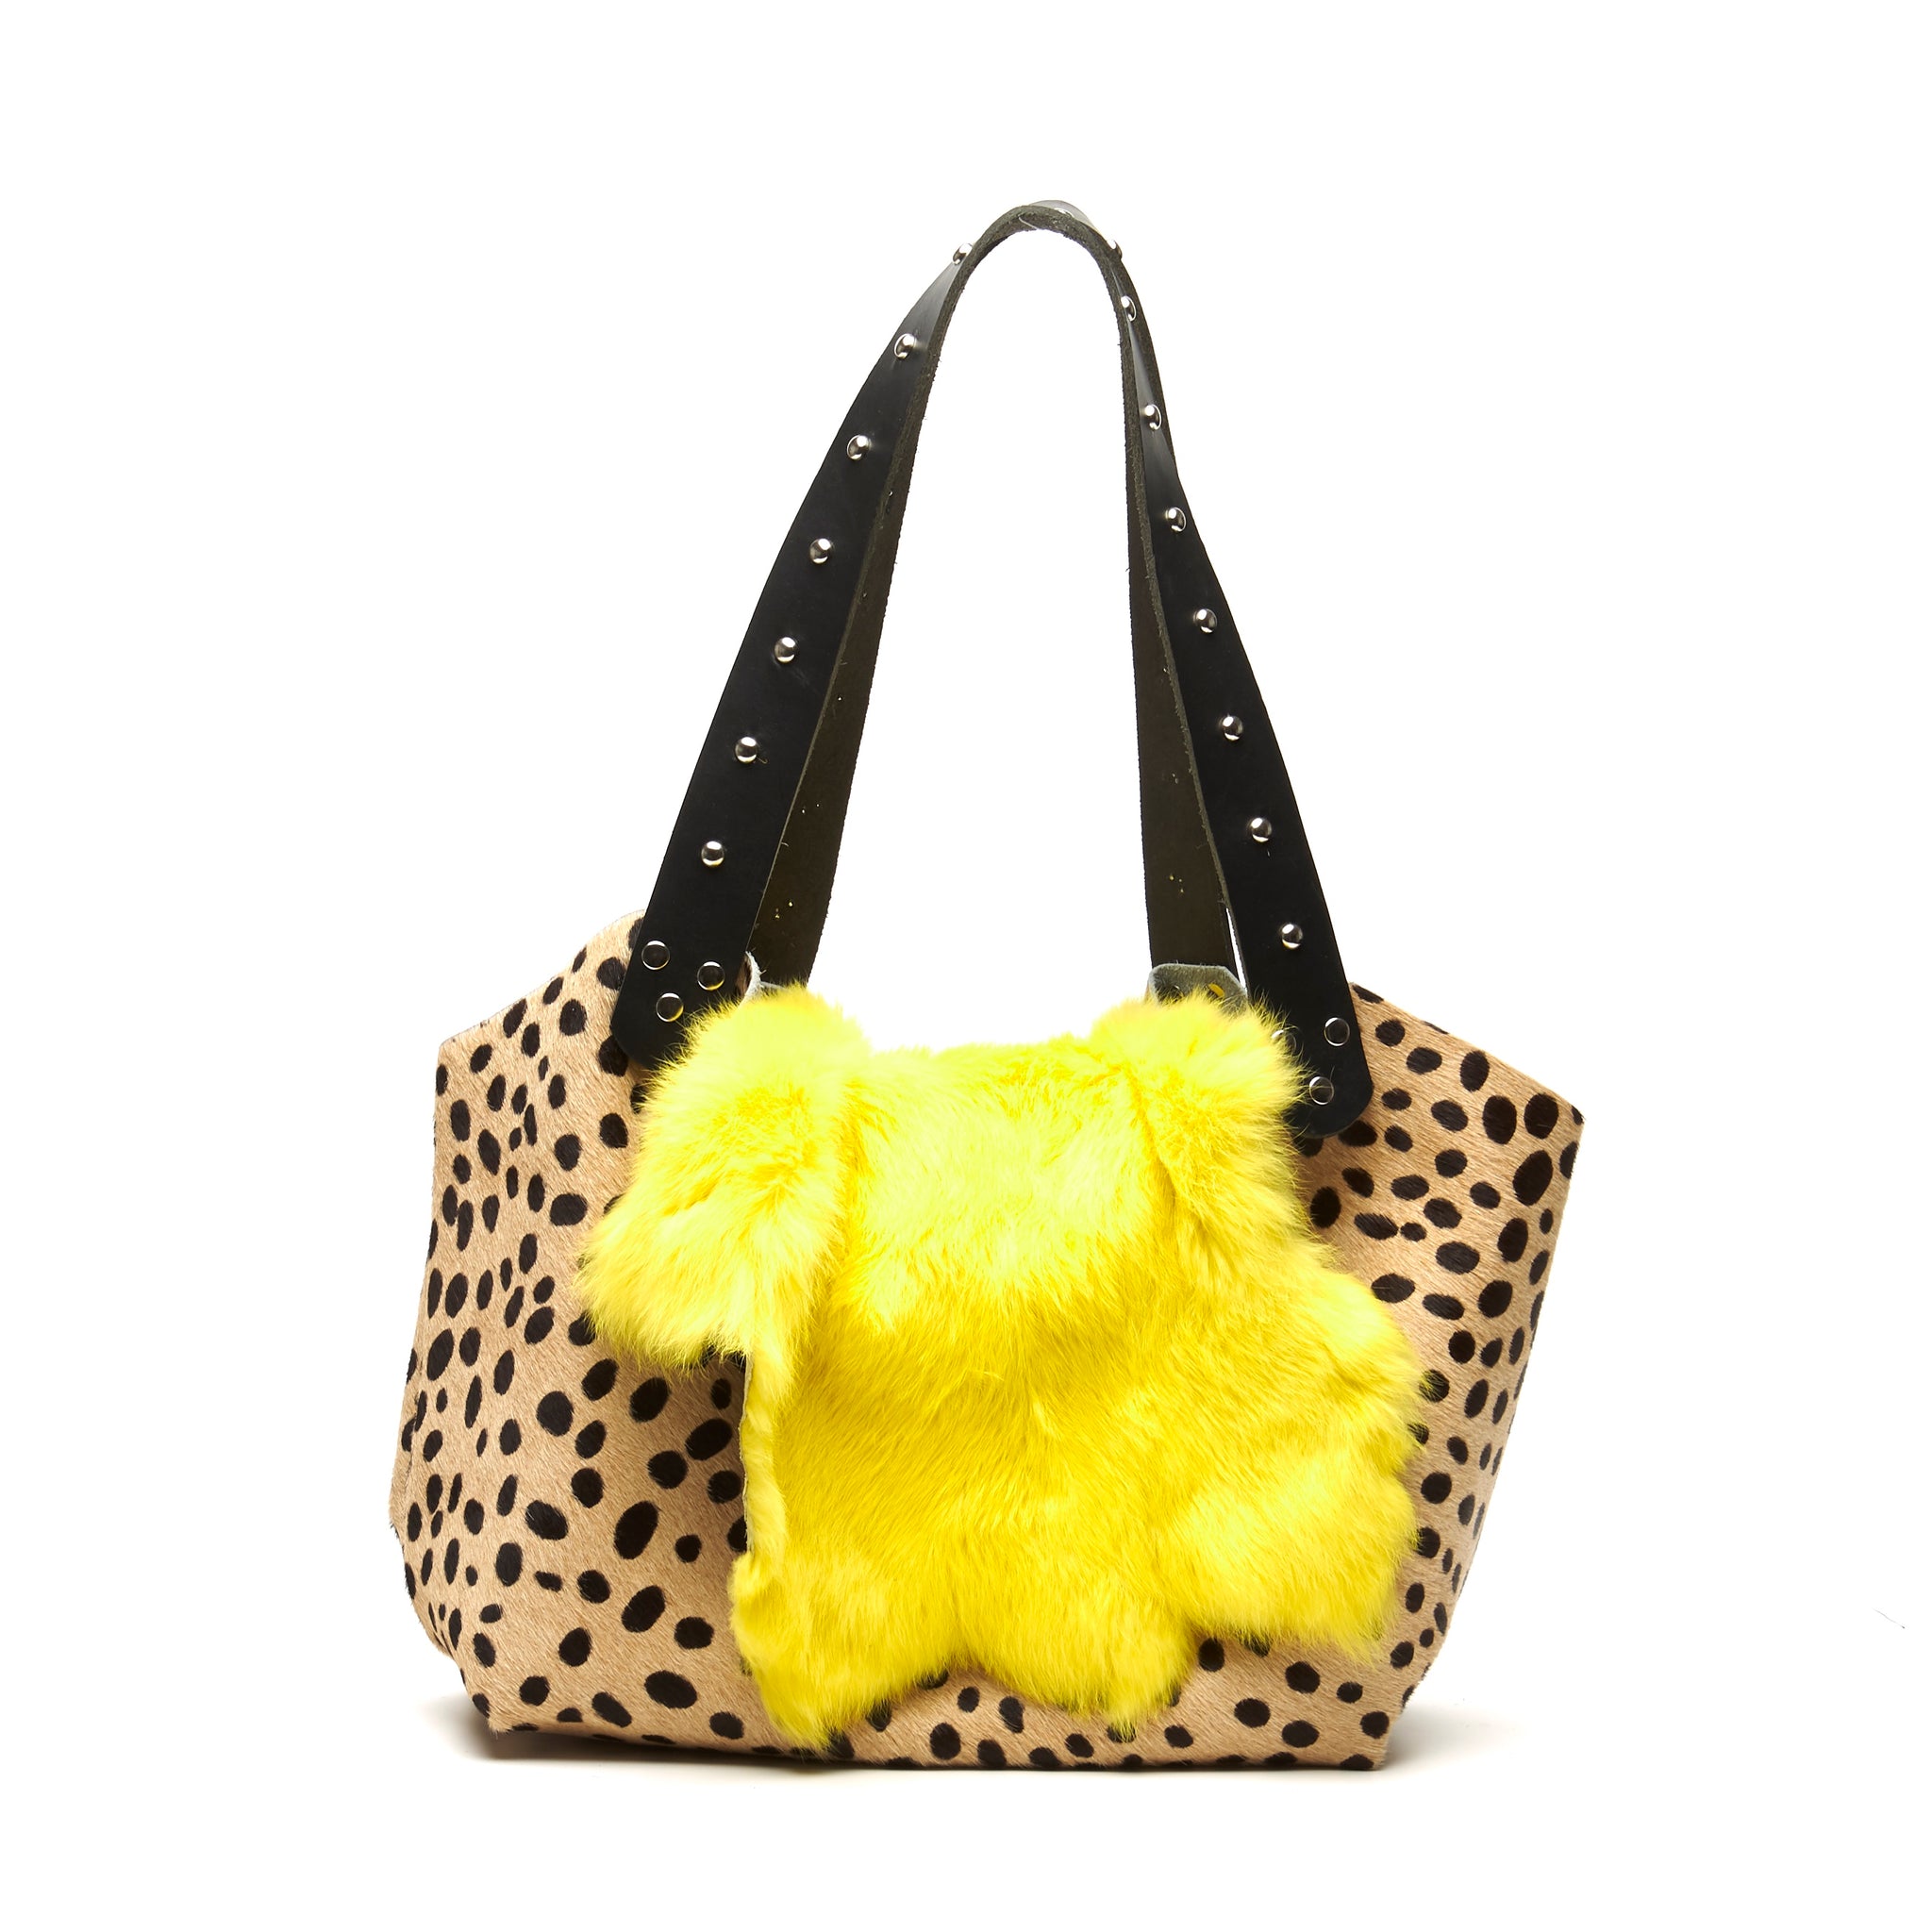 HAIR-ON COWHIDE LARGE TOTE BAG WITH CHEETAH PATTERN AND BRIGHTLY DYED FUR FLAP. by nyet jewelry.